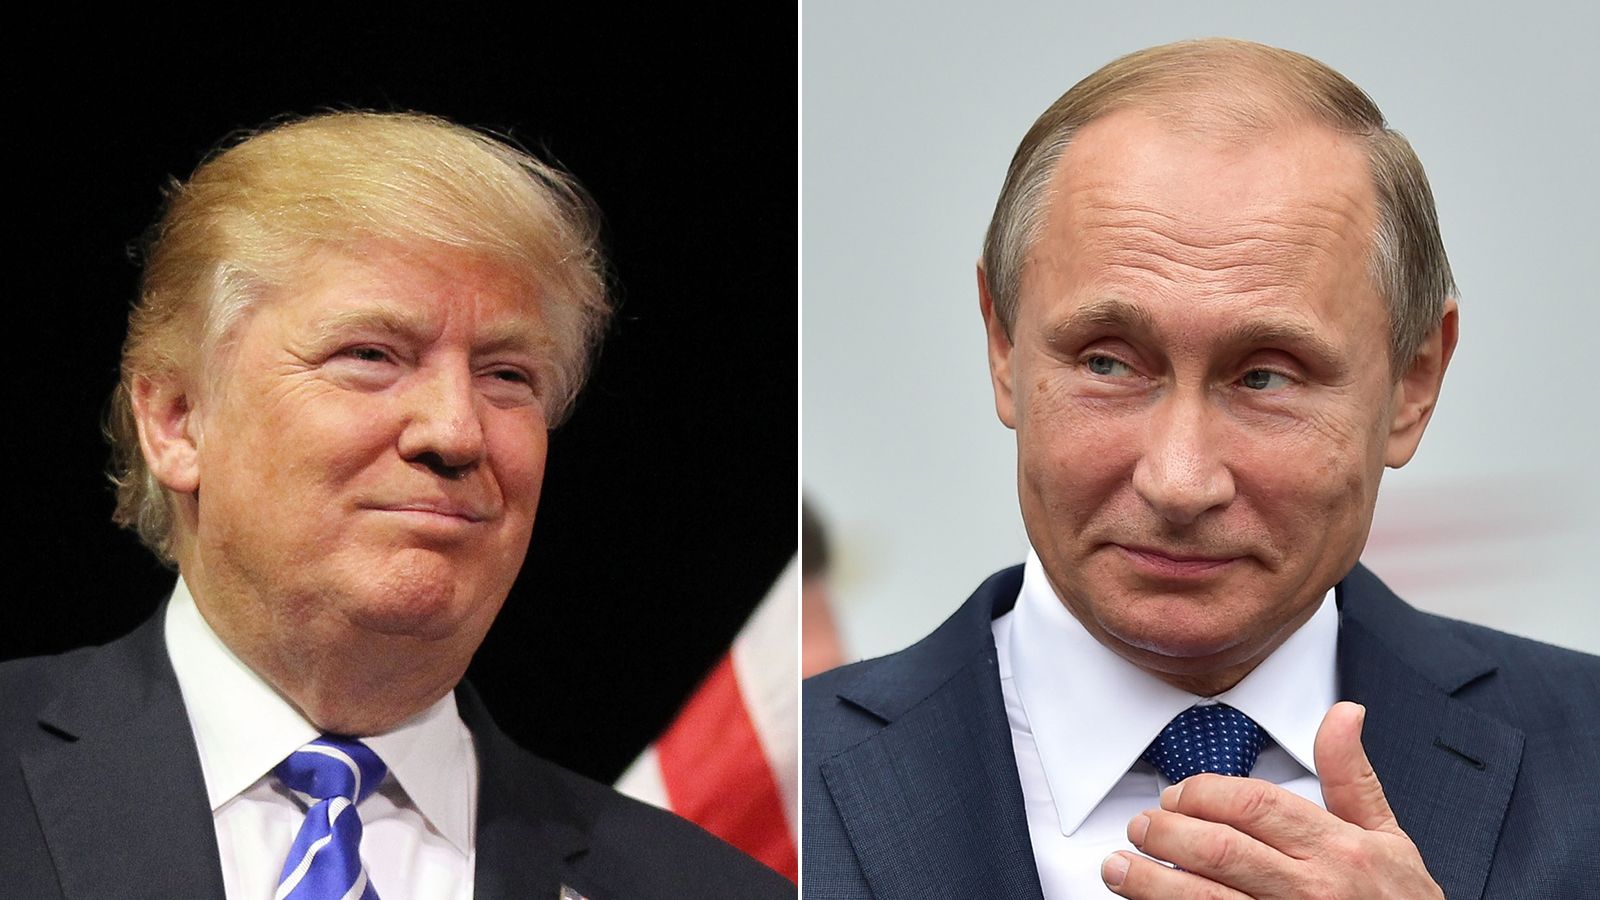 From Vladimir Putin to Donald Trump, just why do the most powerful